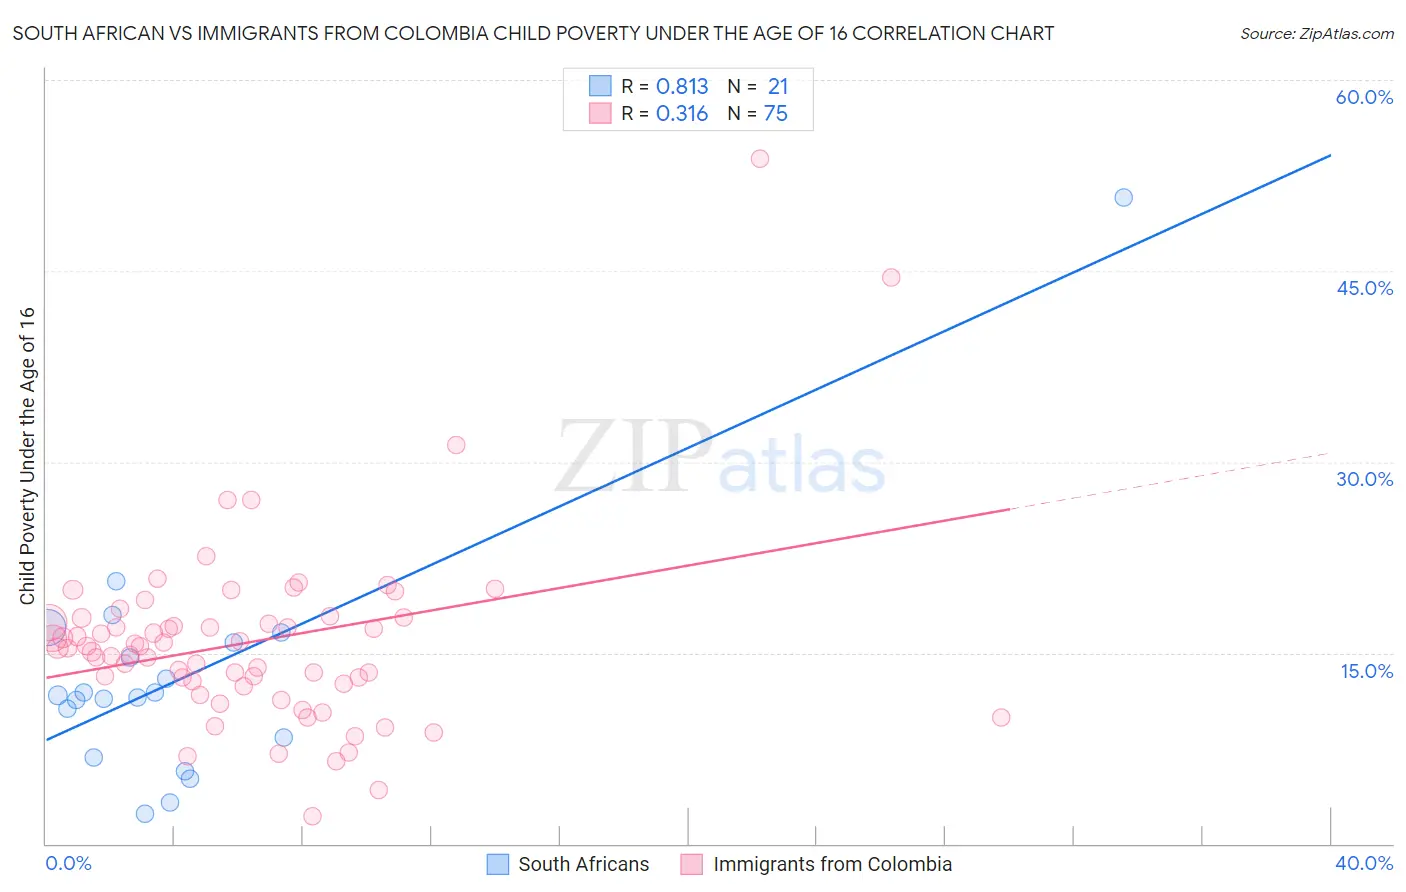 South African vs Immigrants from Colombia Child Poverty Under the Age of 16